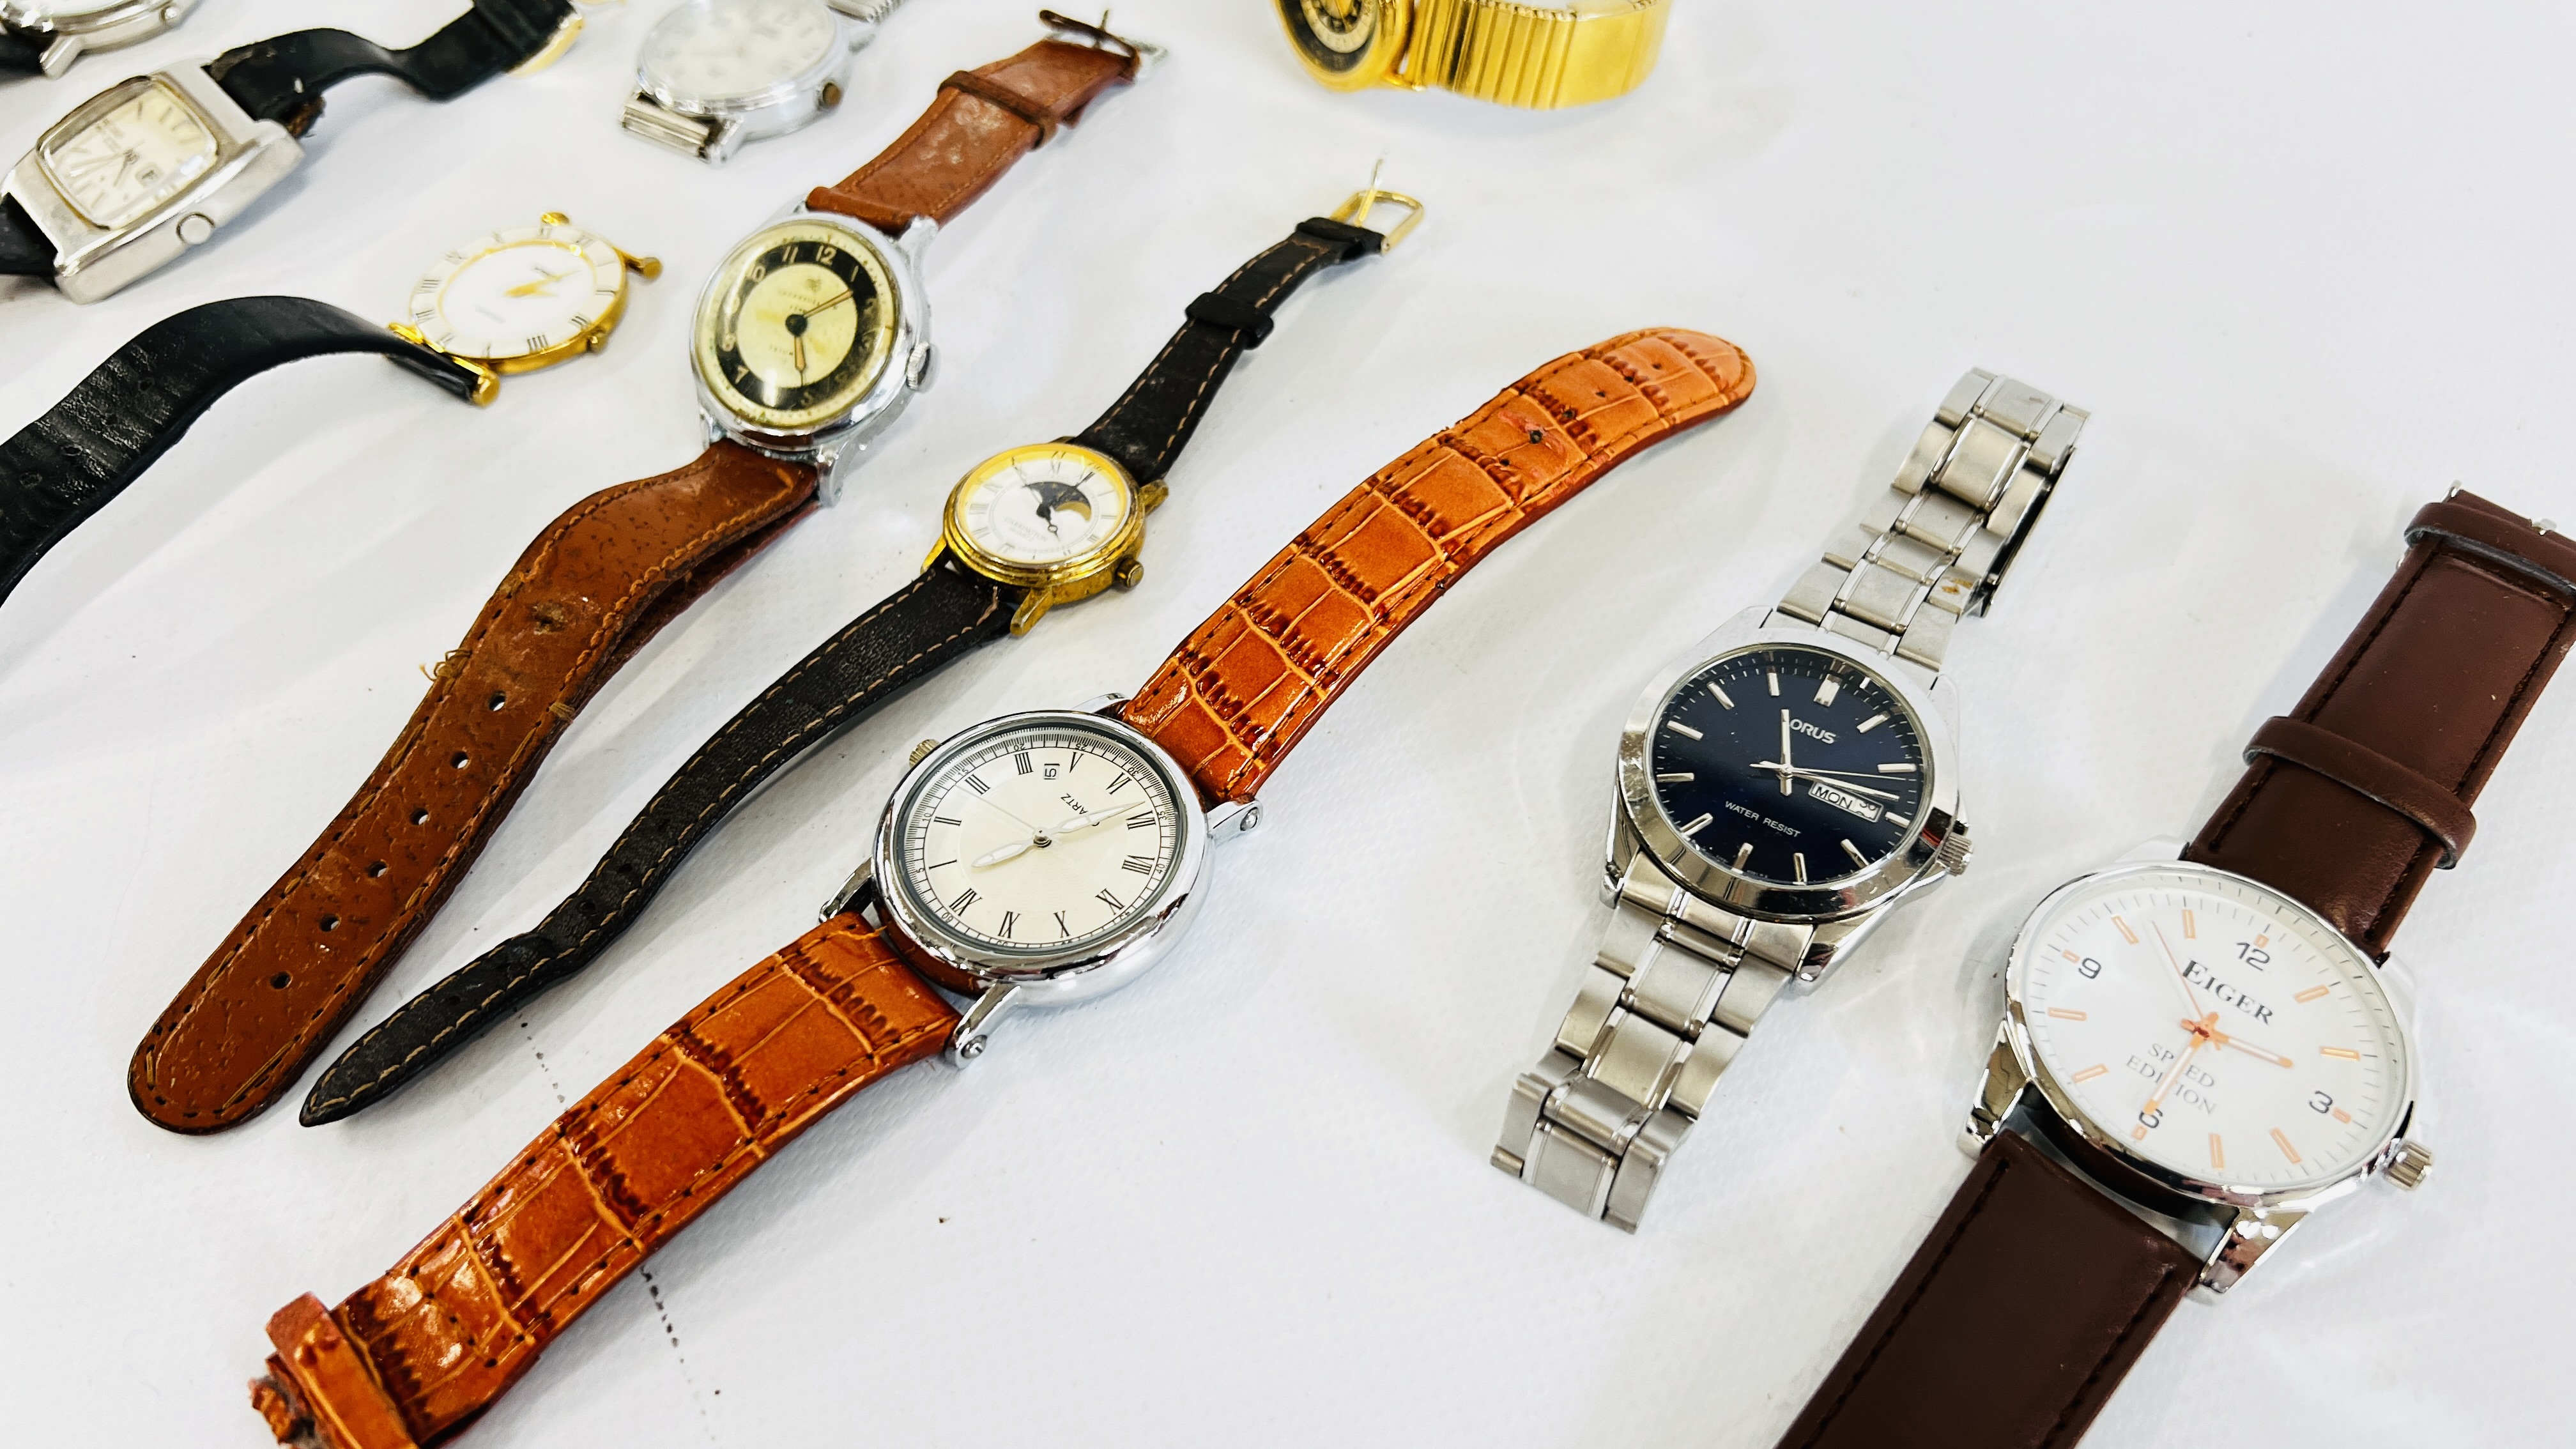 GROUP OF 17 GENT'S WRIST WATCHES TO INCLUDE SEIKO, SEKONDA, CITIZEN ECO DRIVE ETC. - Image 3 of 4